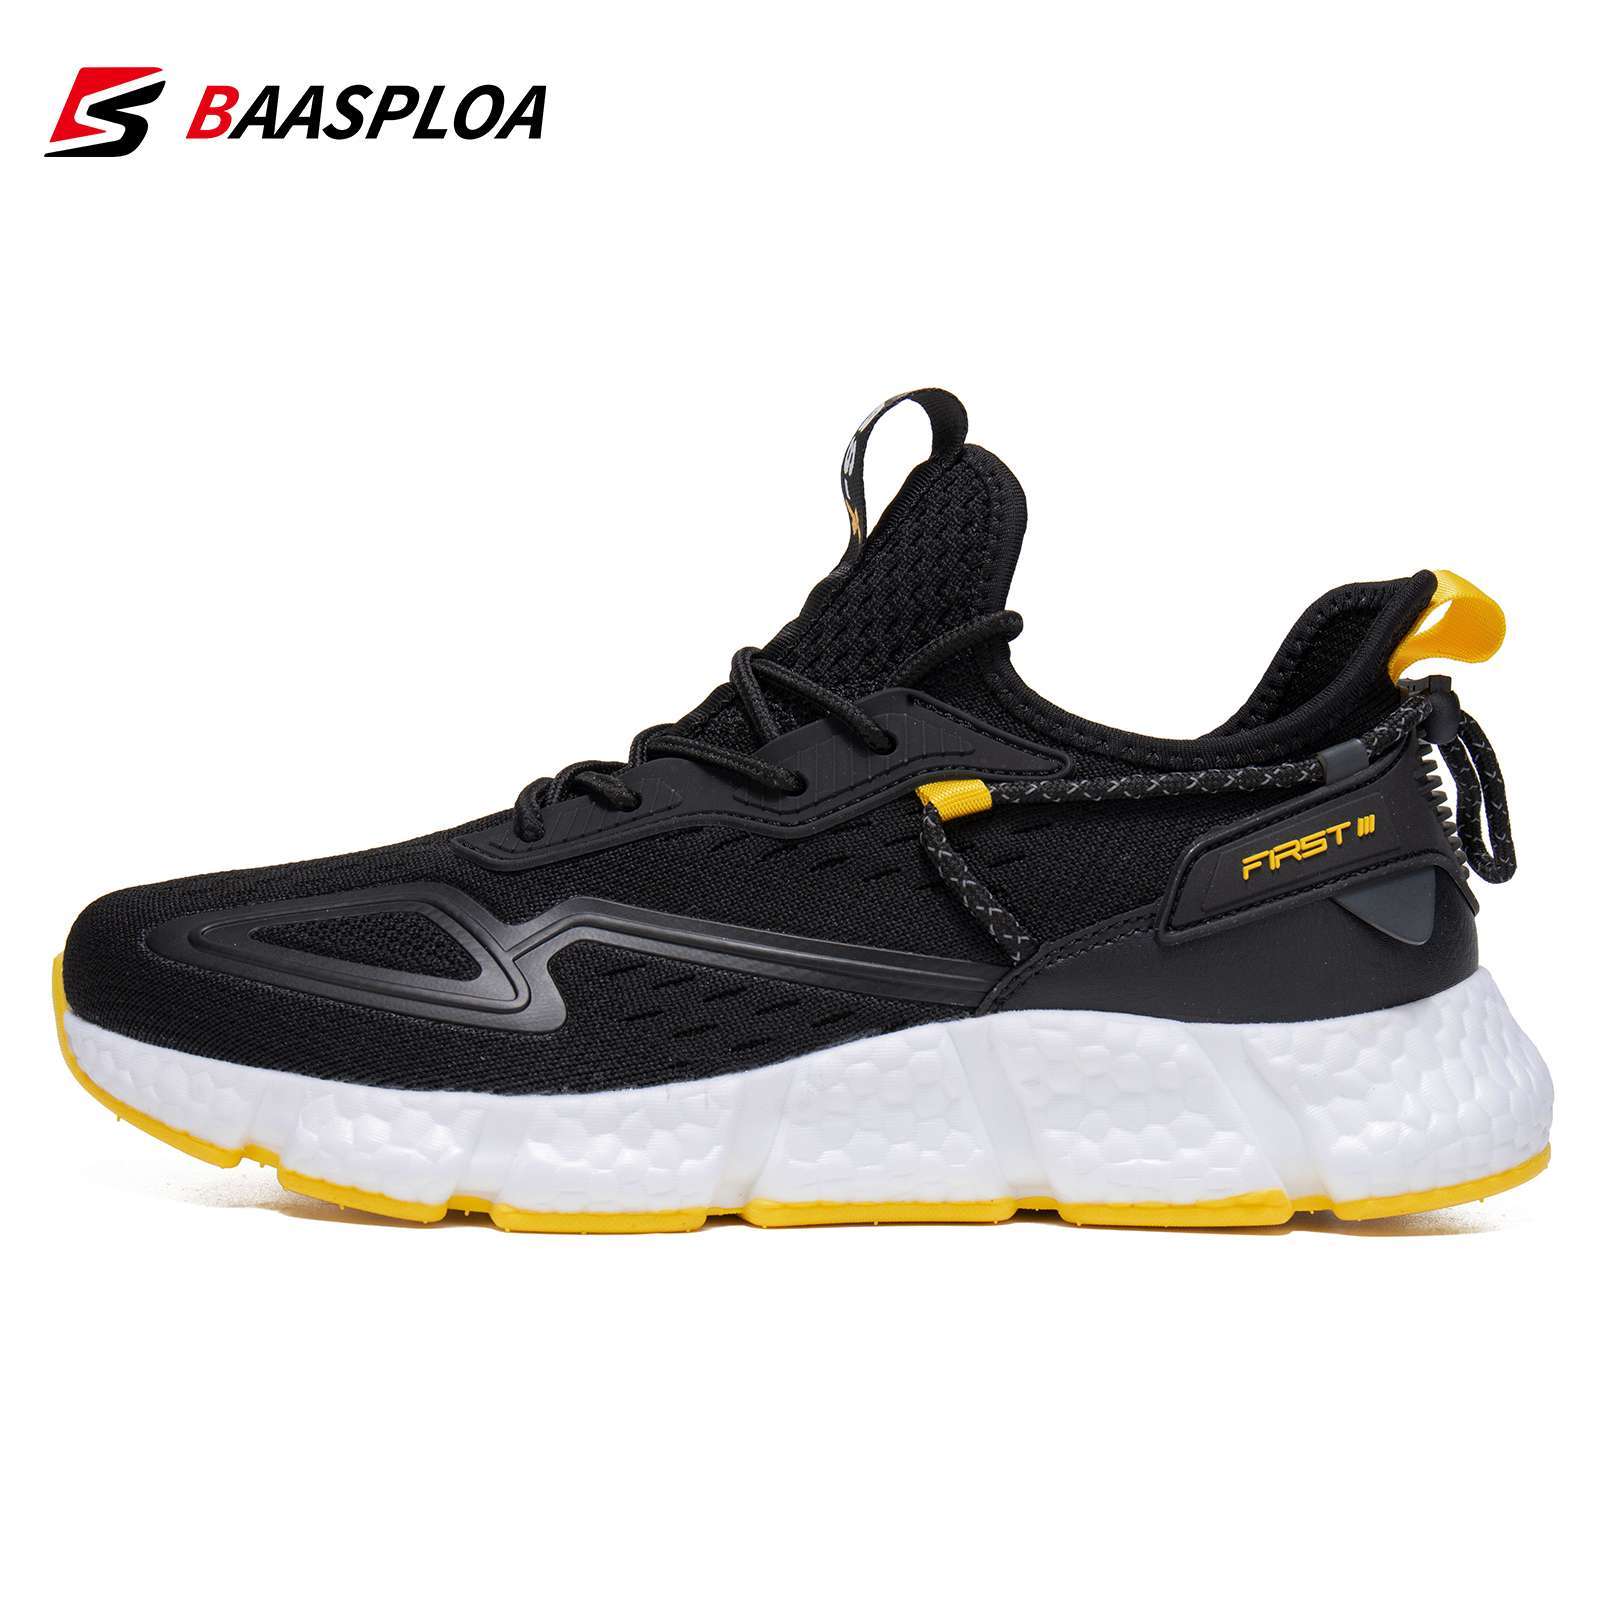 Baasploa New Men Fashion Sneakers Running Shoes for Men Non slip Comfortable Male Tennis Shoes Breathable 3